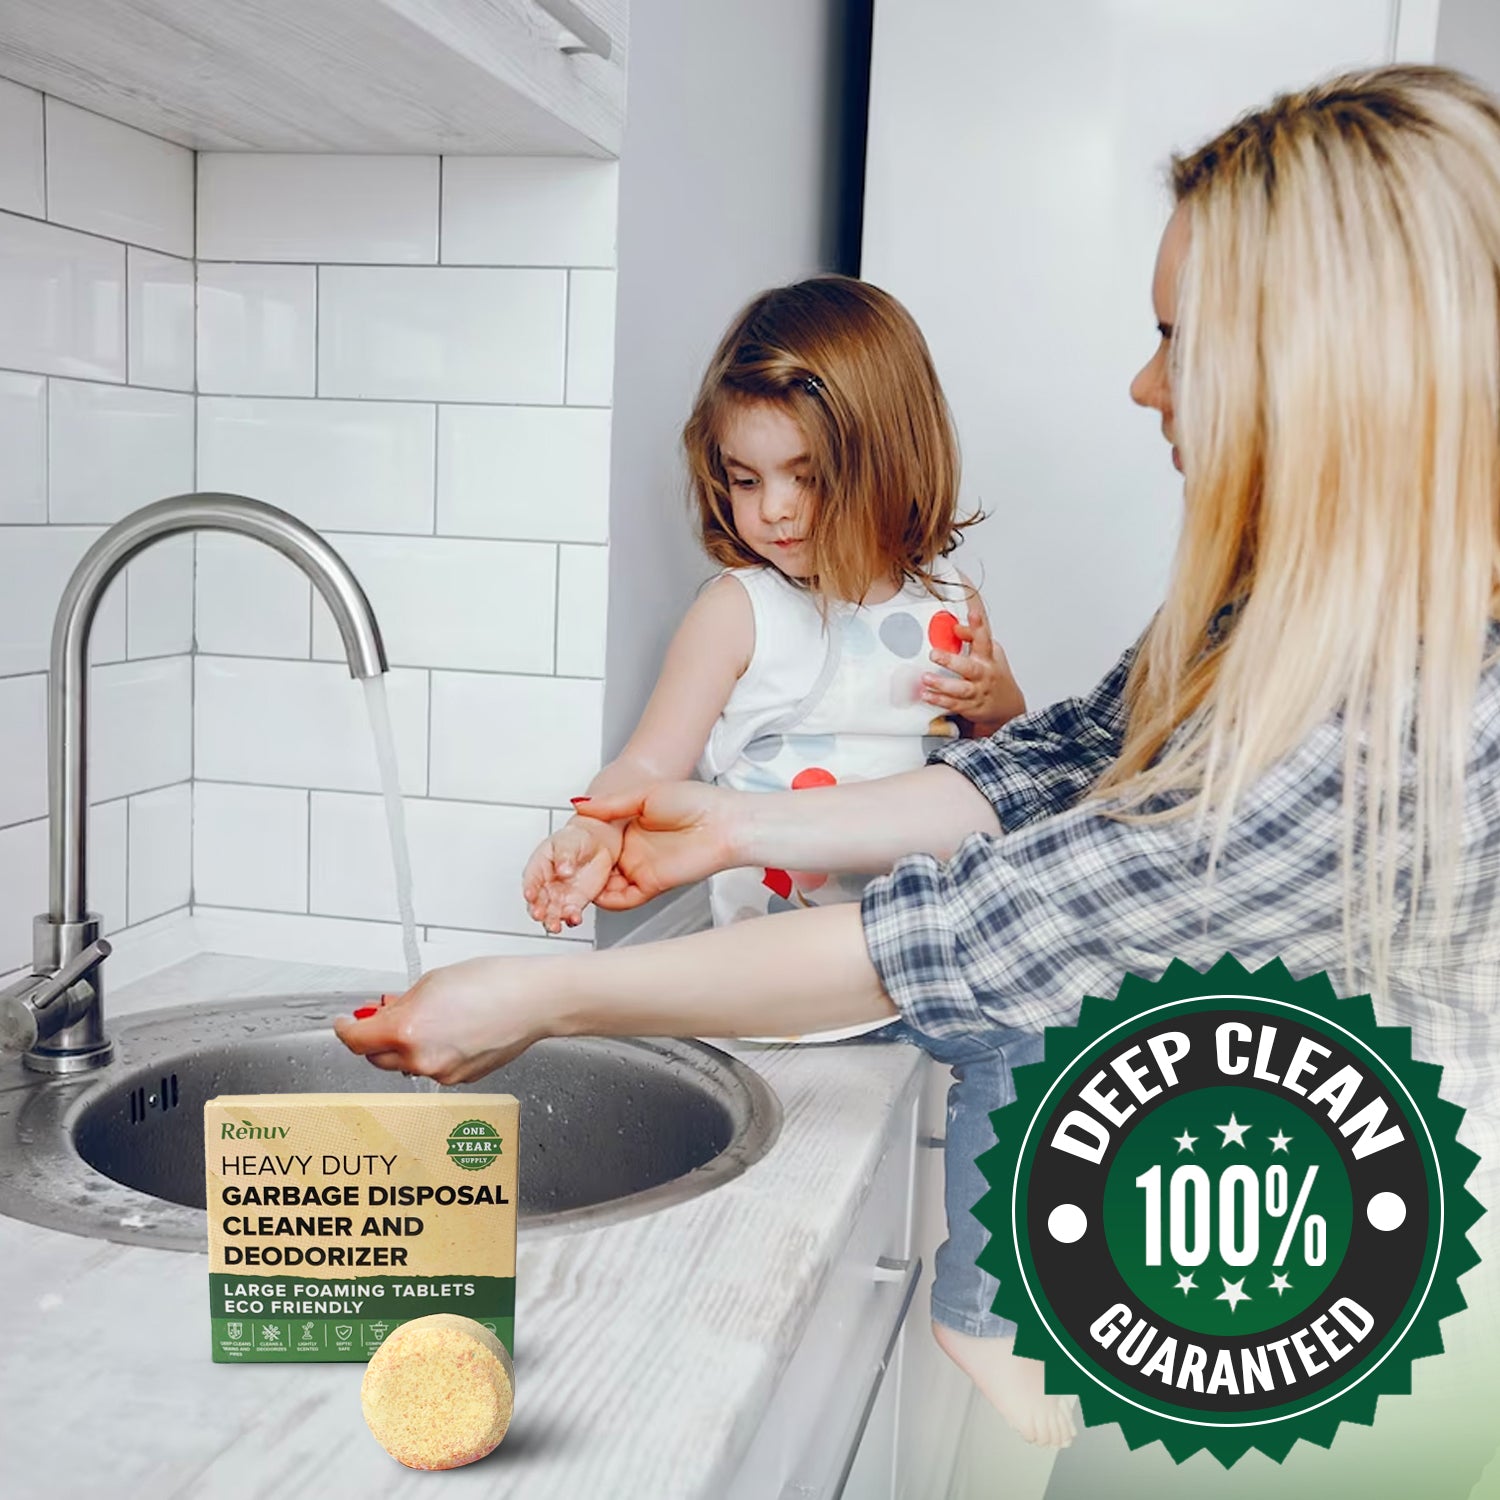 Keep Your Kitchen Fresh with Renuv Garbage Disposal Cleaner and Deodorizer